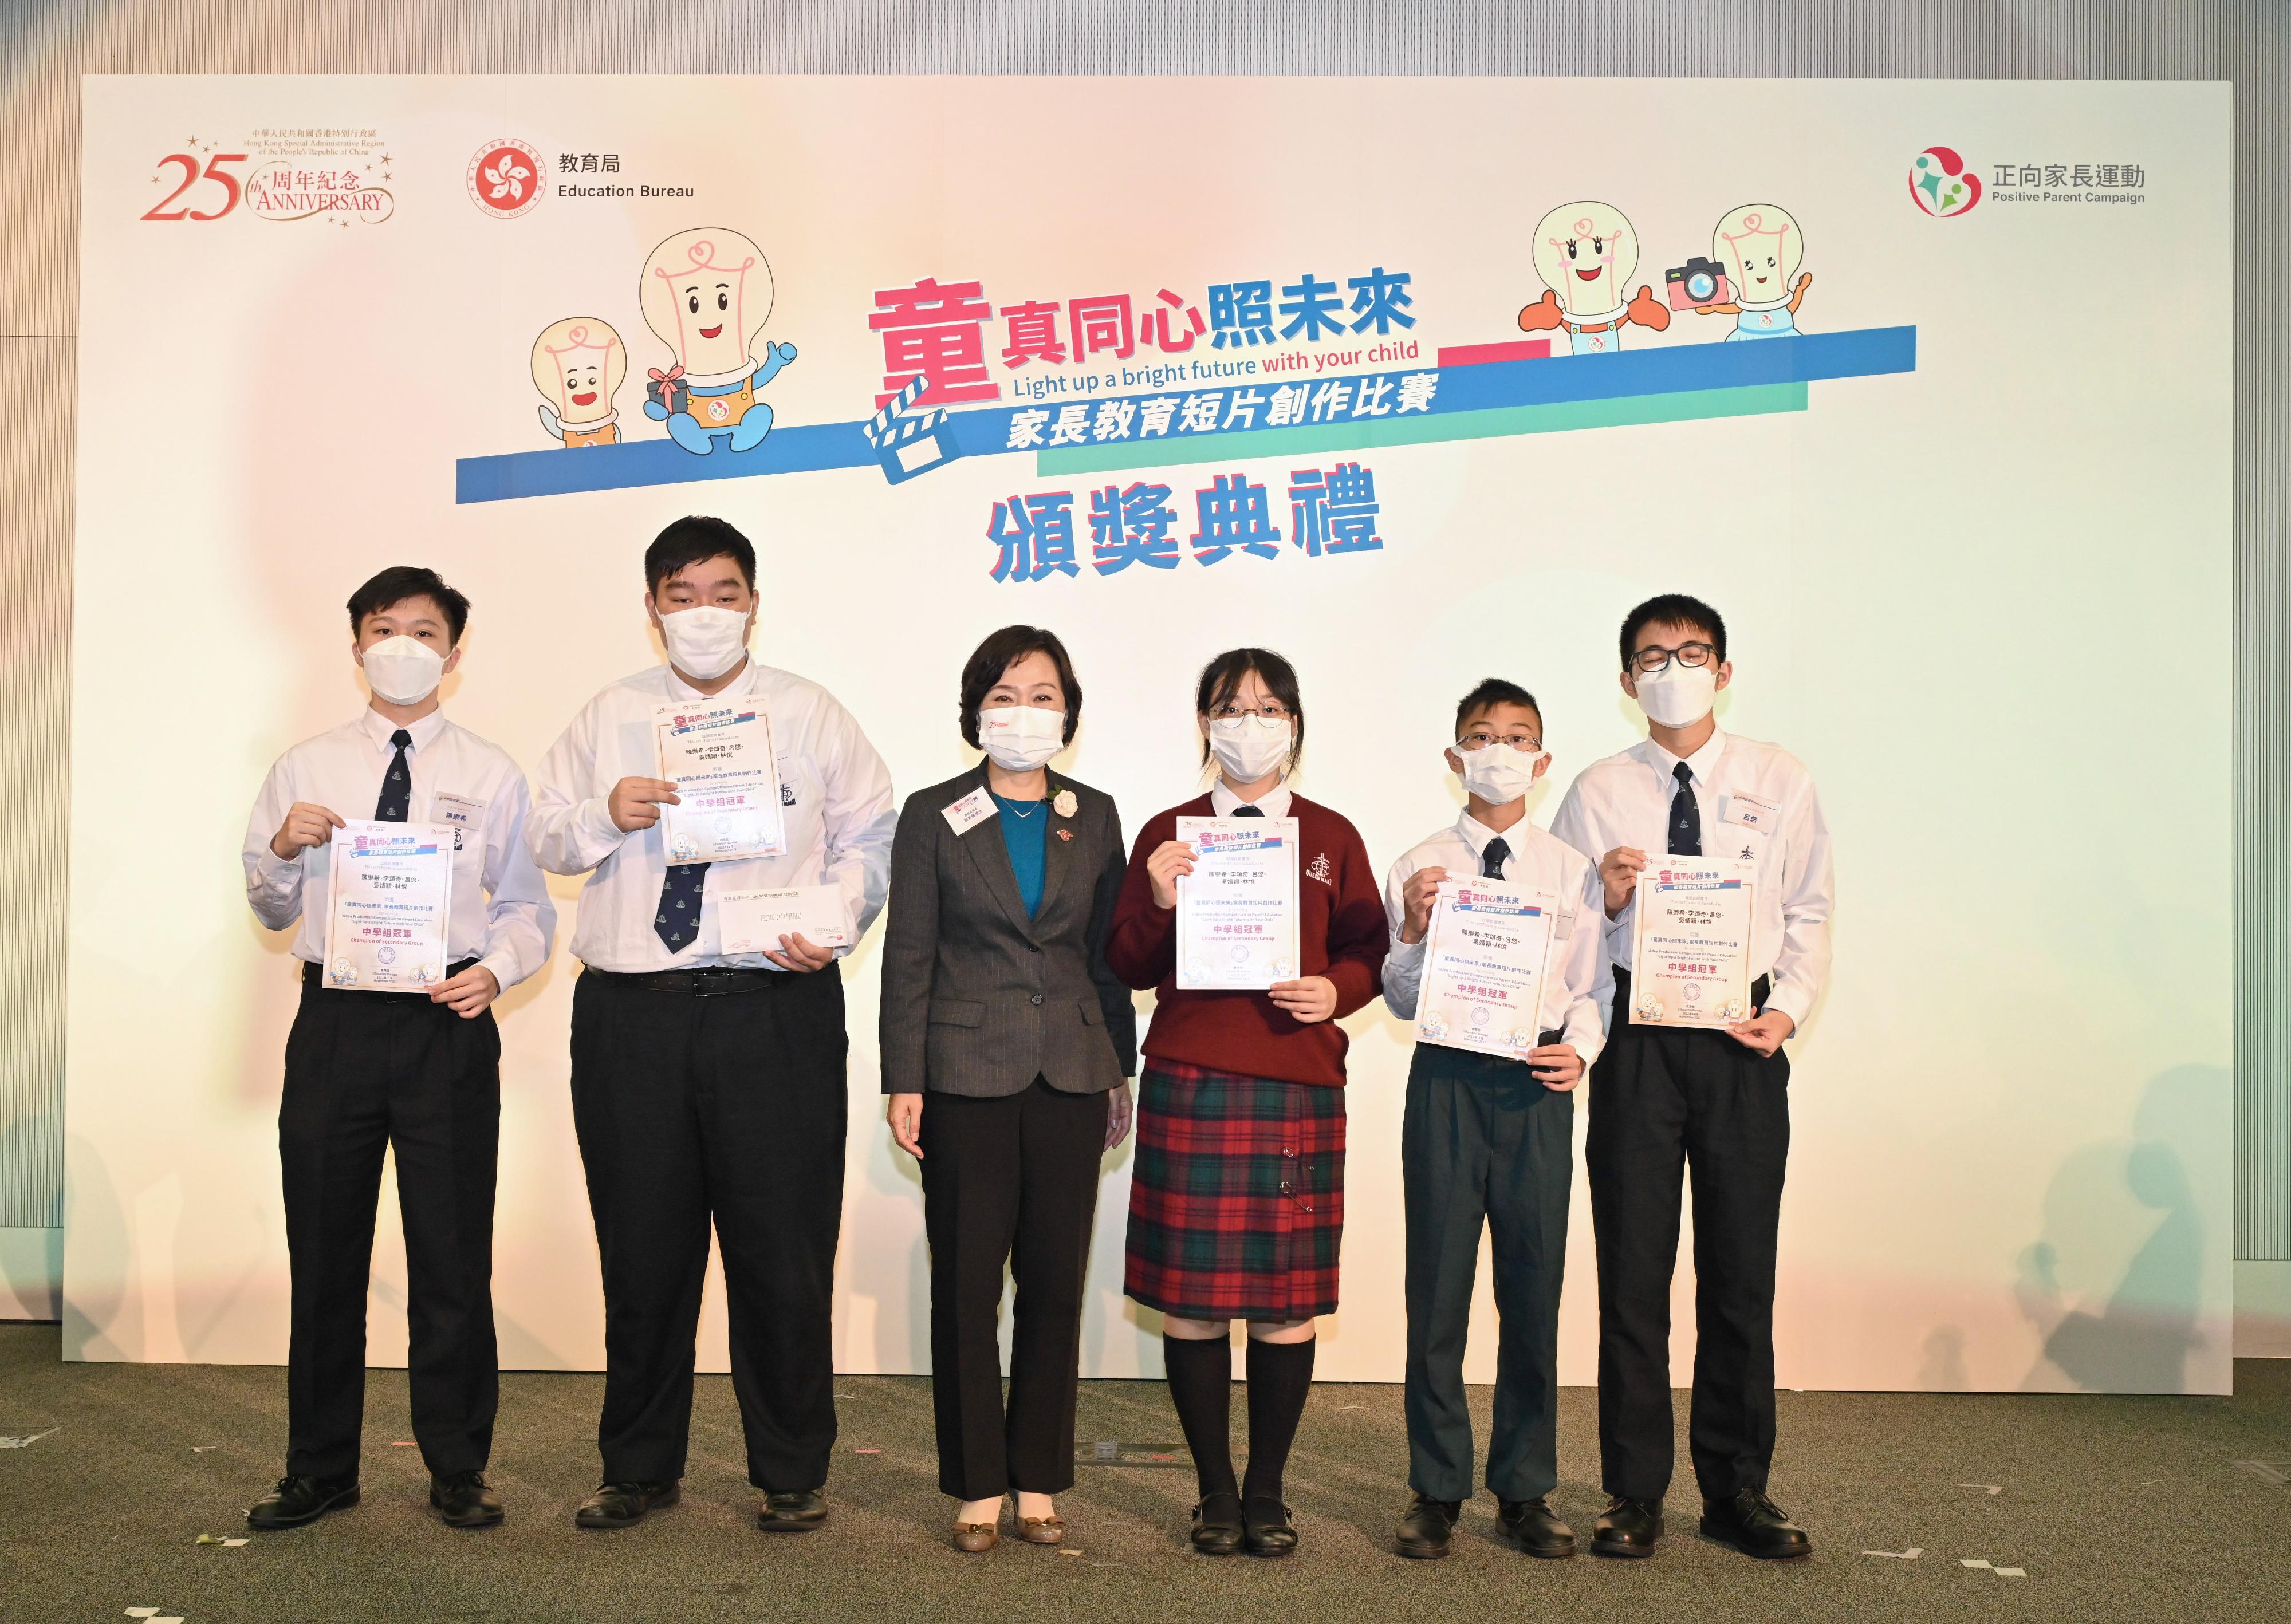 The Secretary for Education, Dr Choi Yuk-lin (third left), presents prizes to the winners at the prize presentation ceremony for Light Up a Bright Future with Your Child video production competition on parent education today (November 26).